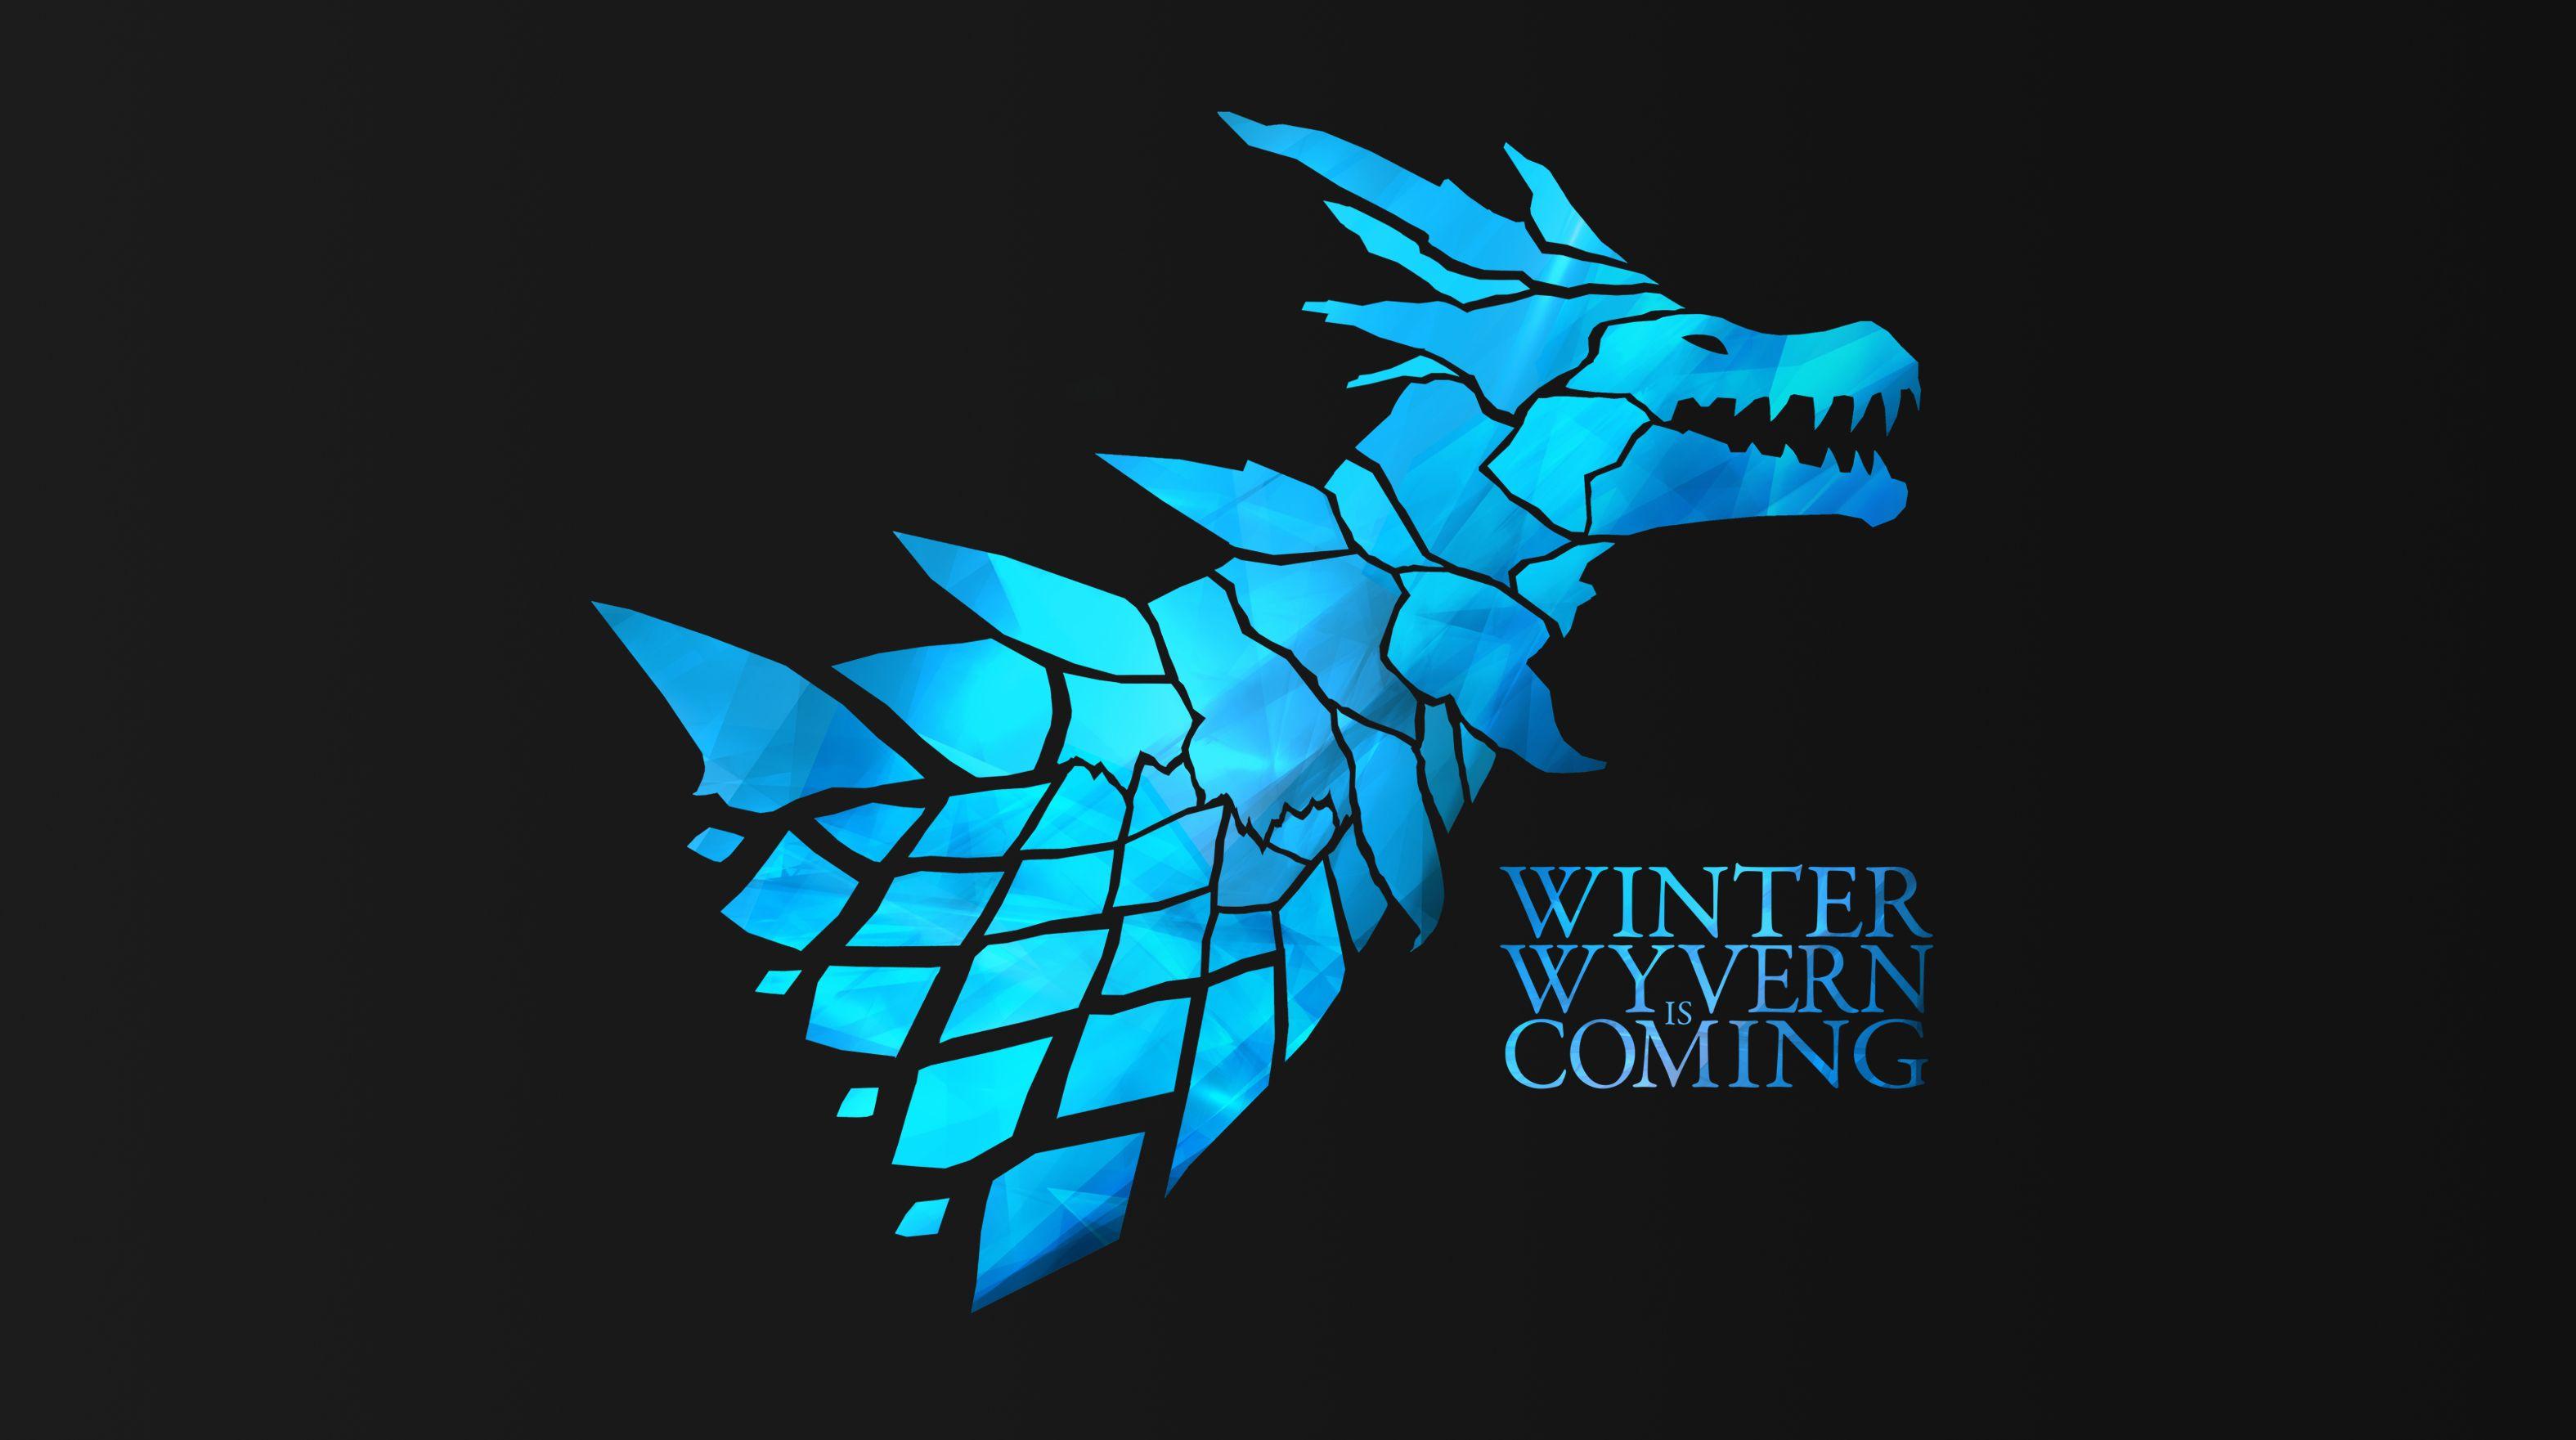 Winter (Wyvern) Is Coming Wallpaper, more